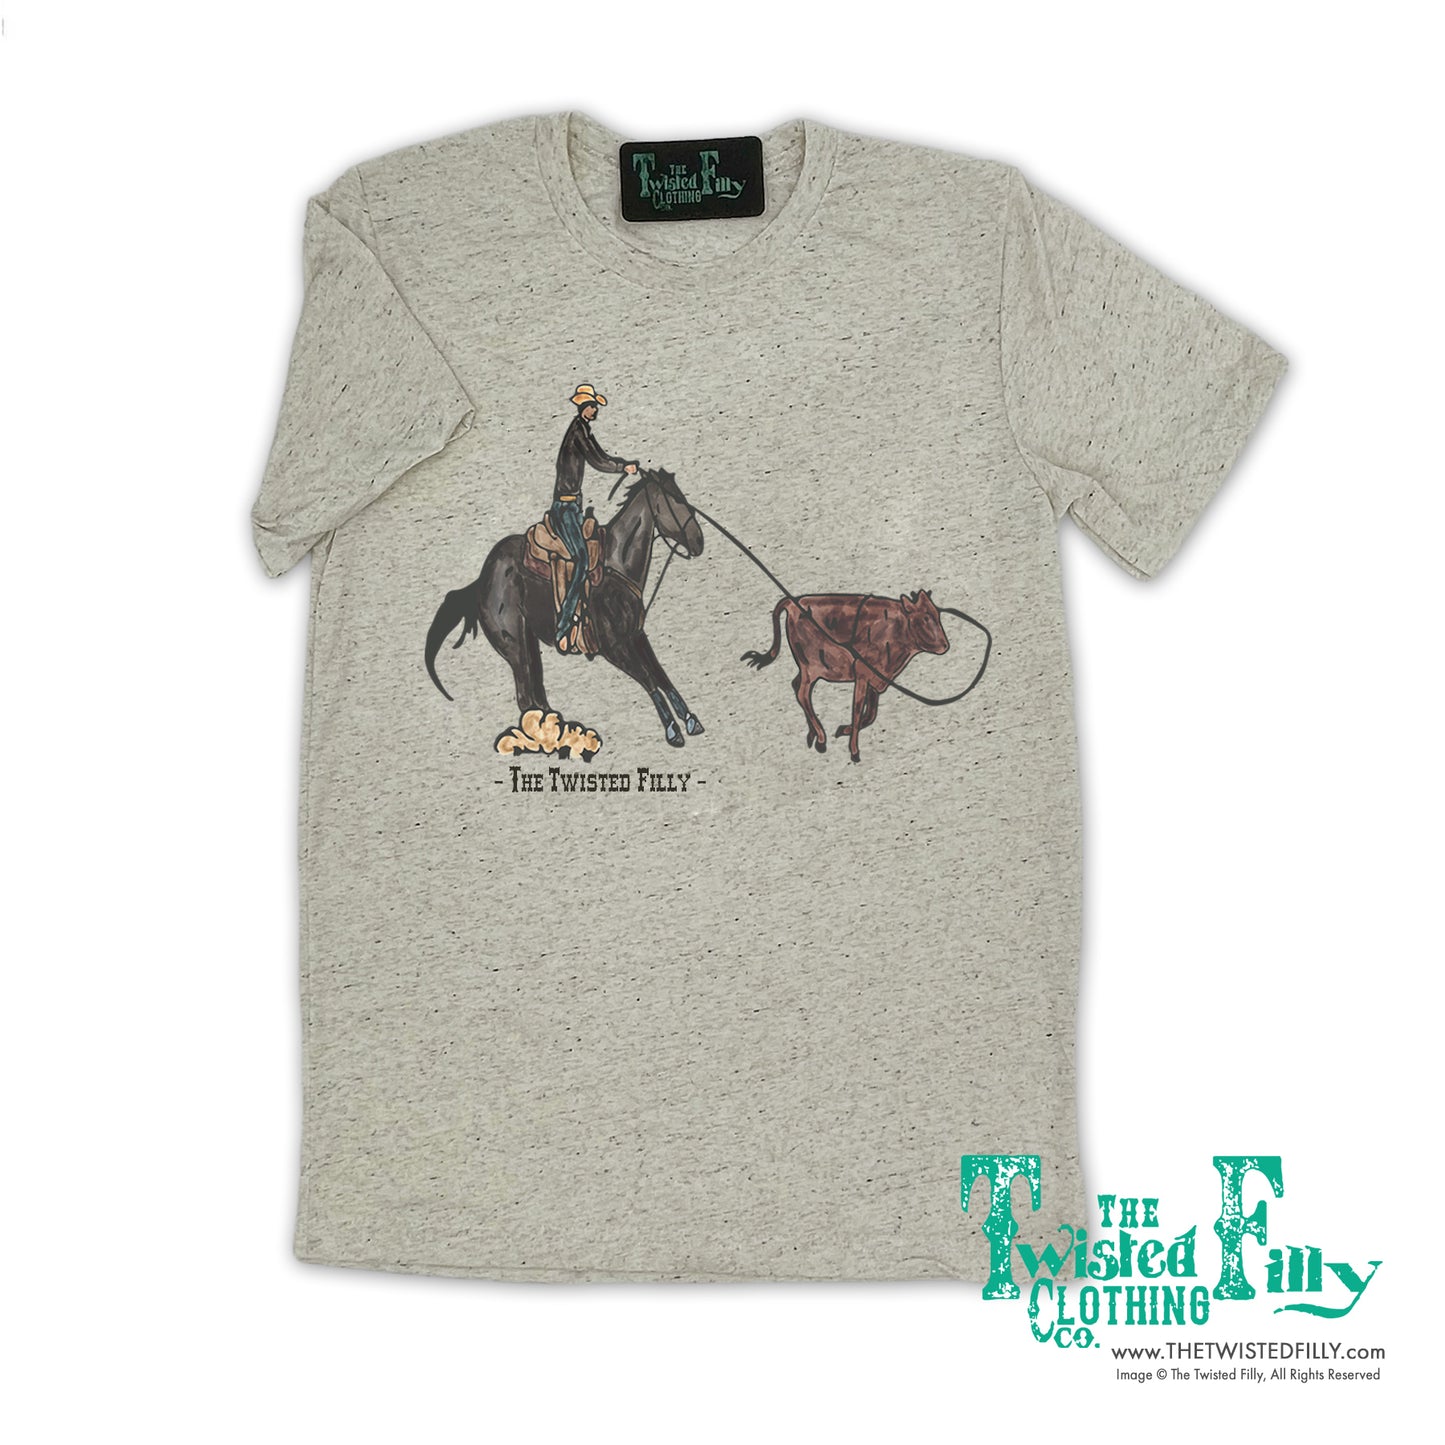 End Of The Line Calf Roper - S/S Crew Neck Adult Tee - Oatmeal